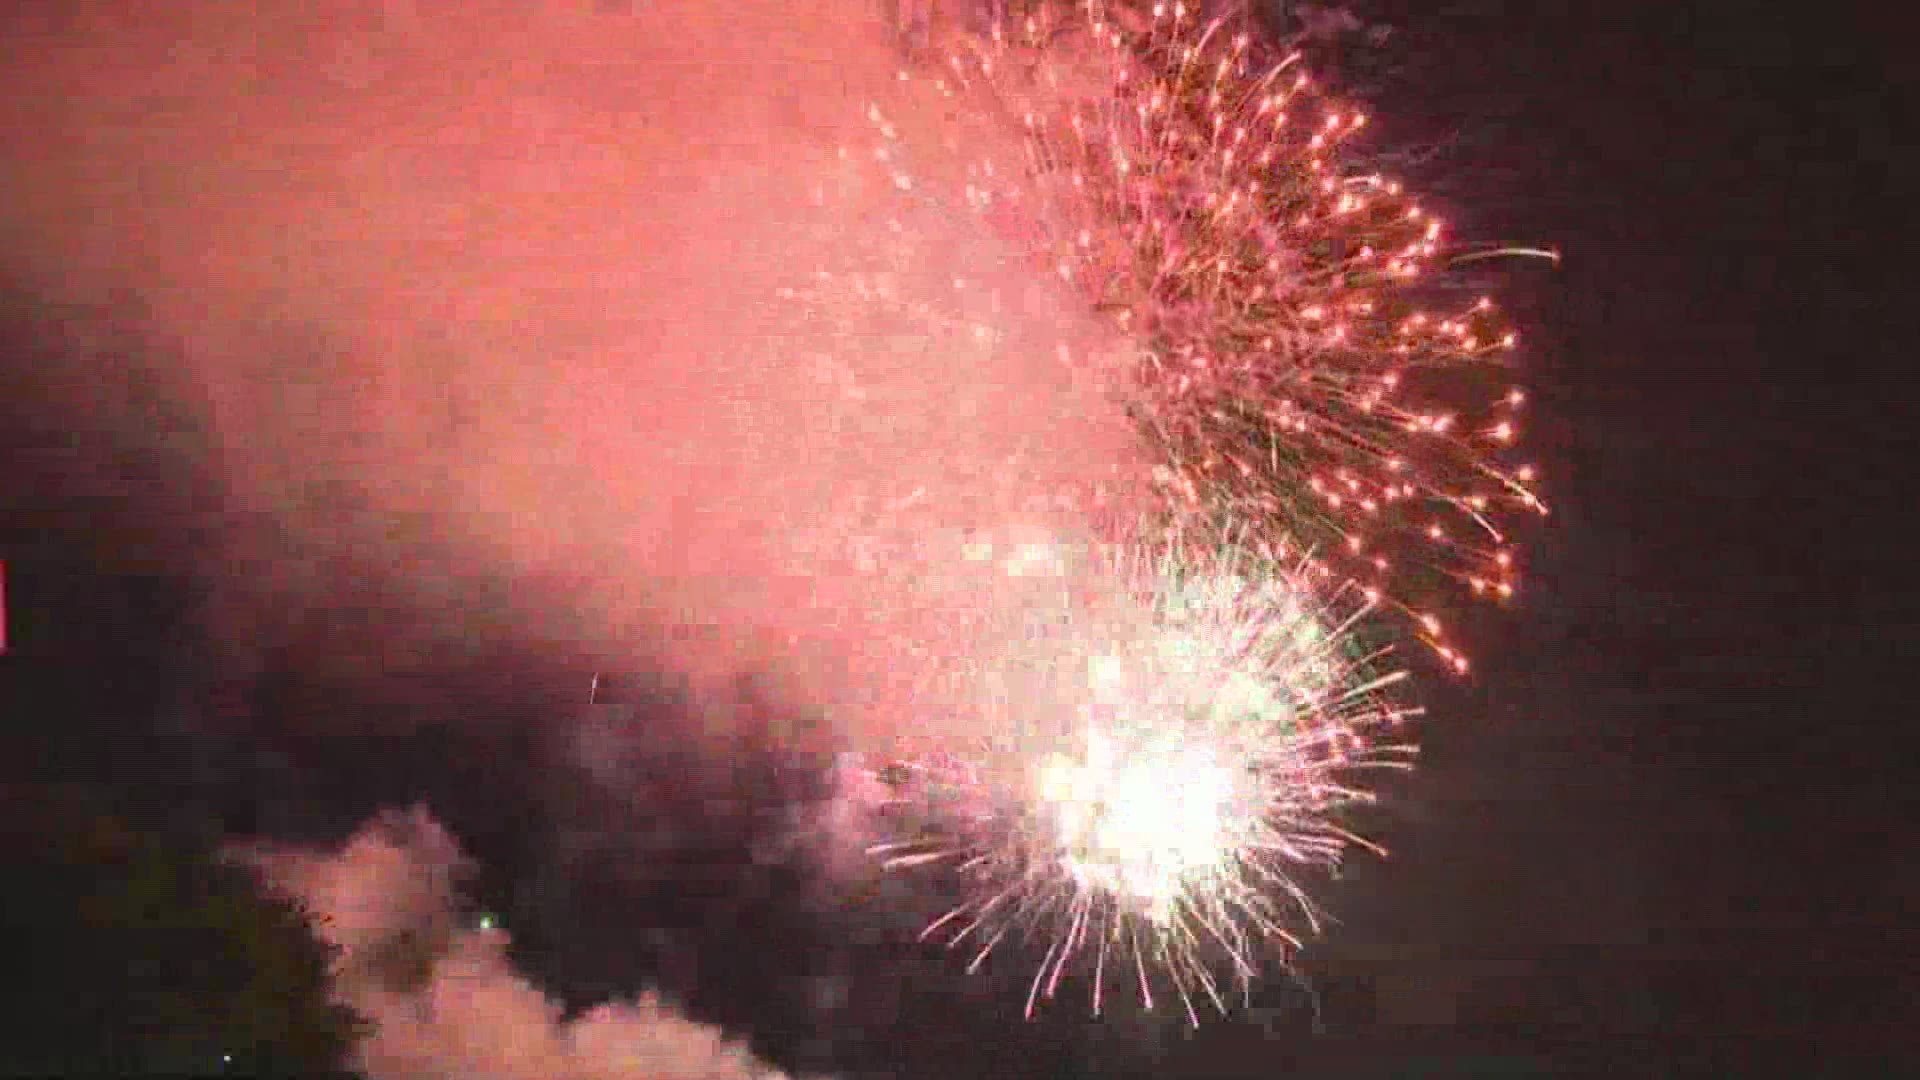 Fireworks wowed the crowds in Portland, Maine Sunday night. here is Portland's finale